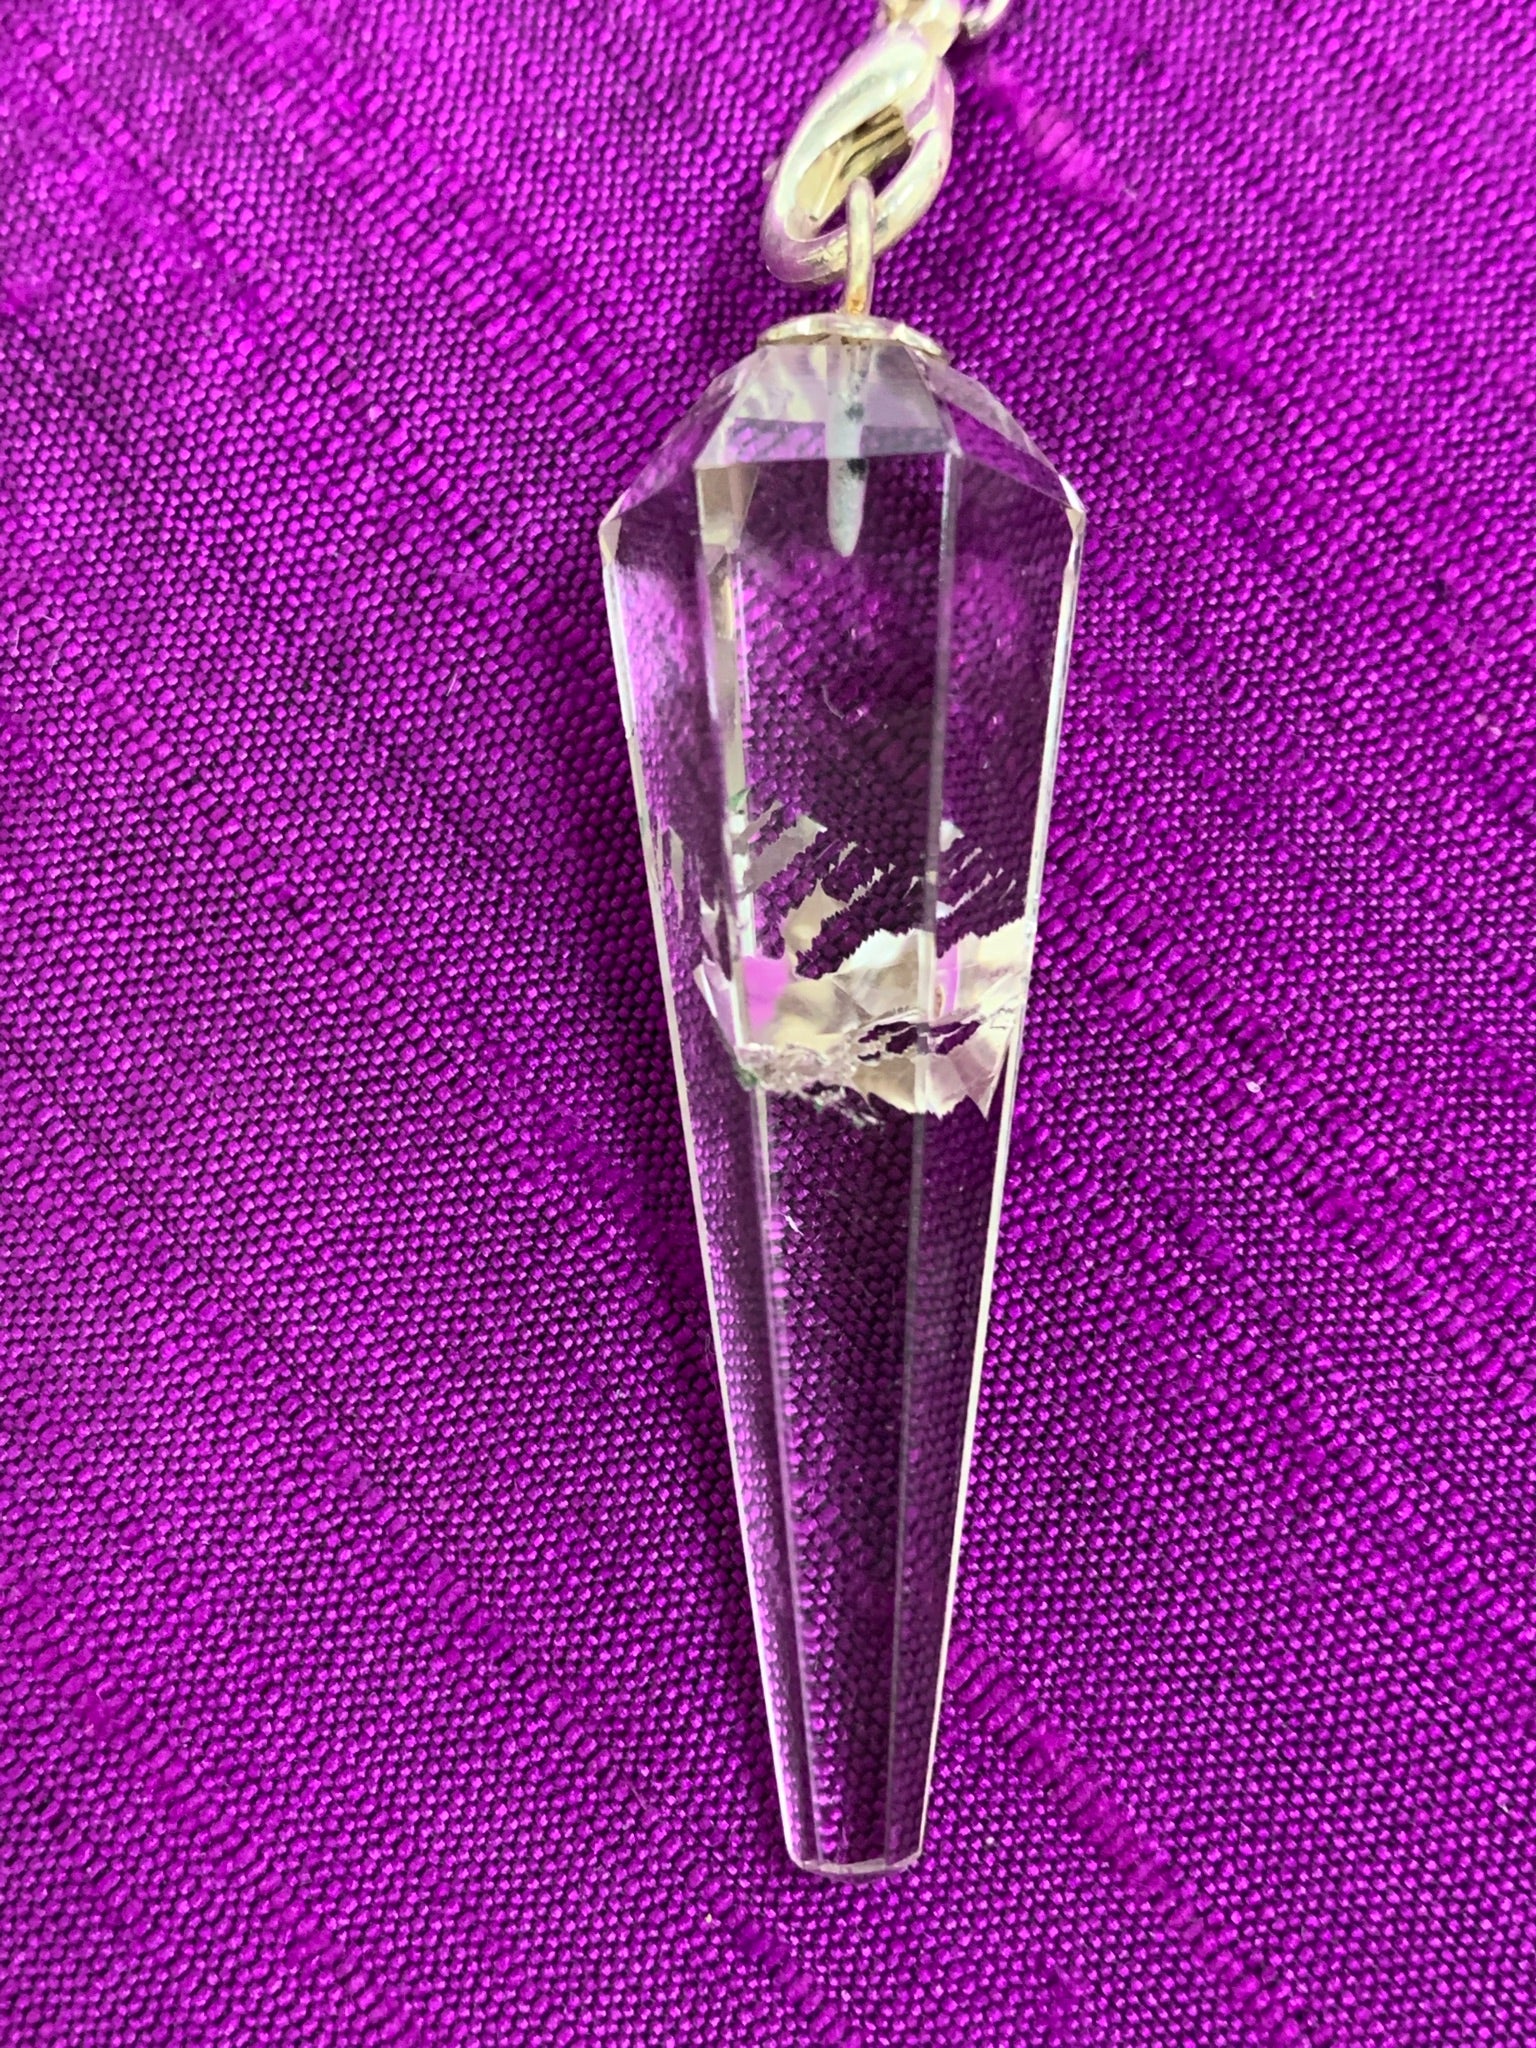 Close-up view of the clear quartz crystal (this one with an inclusion, but each pendulum's crystal is different.